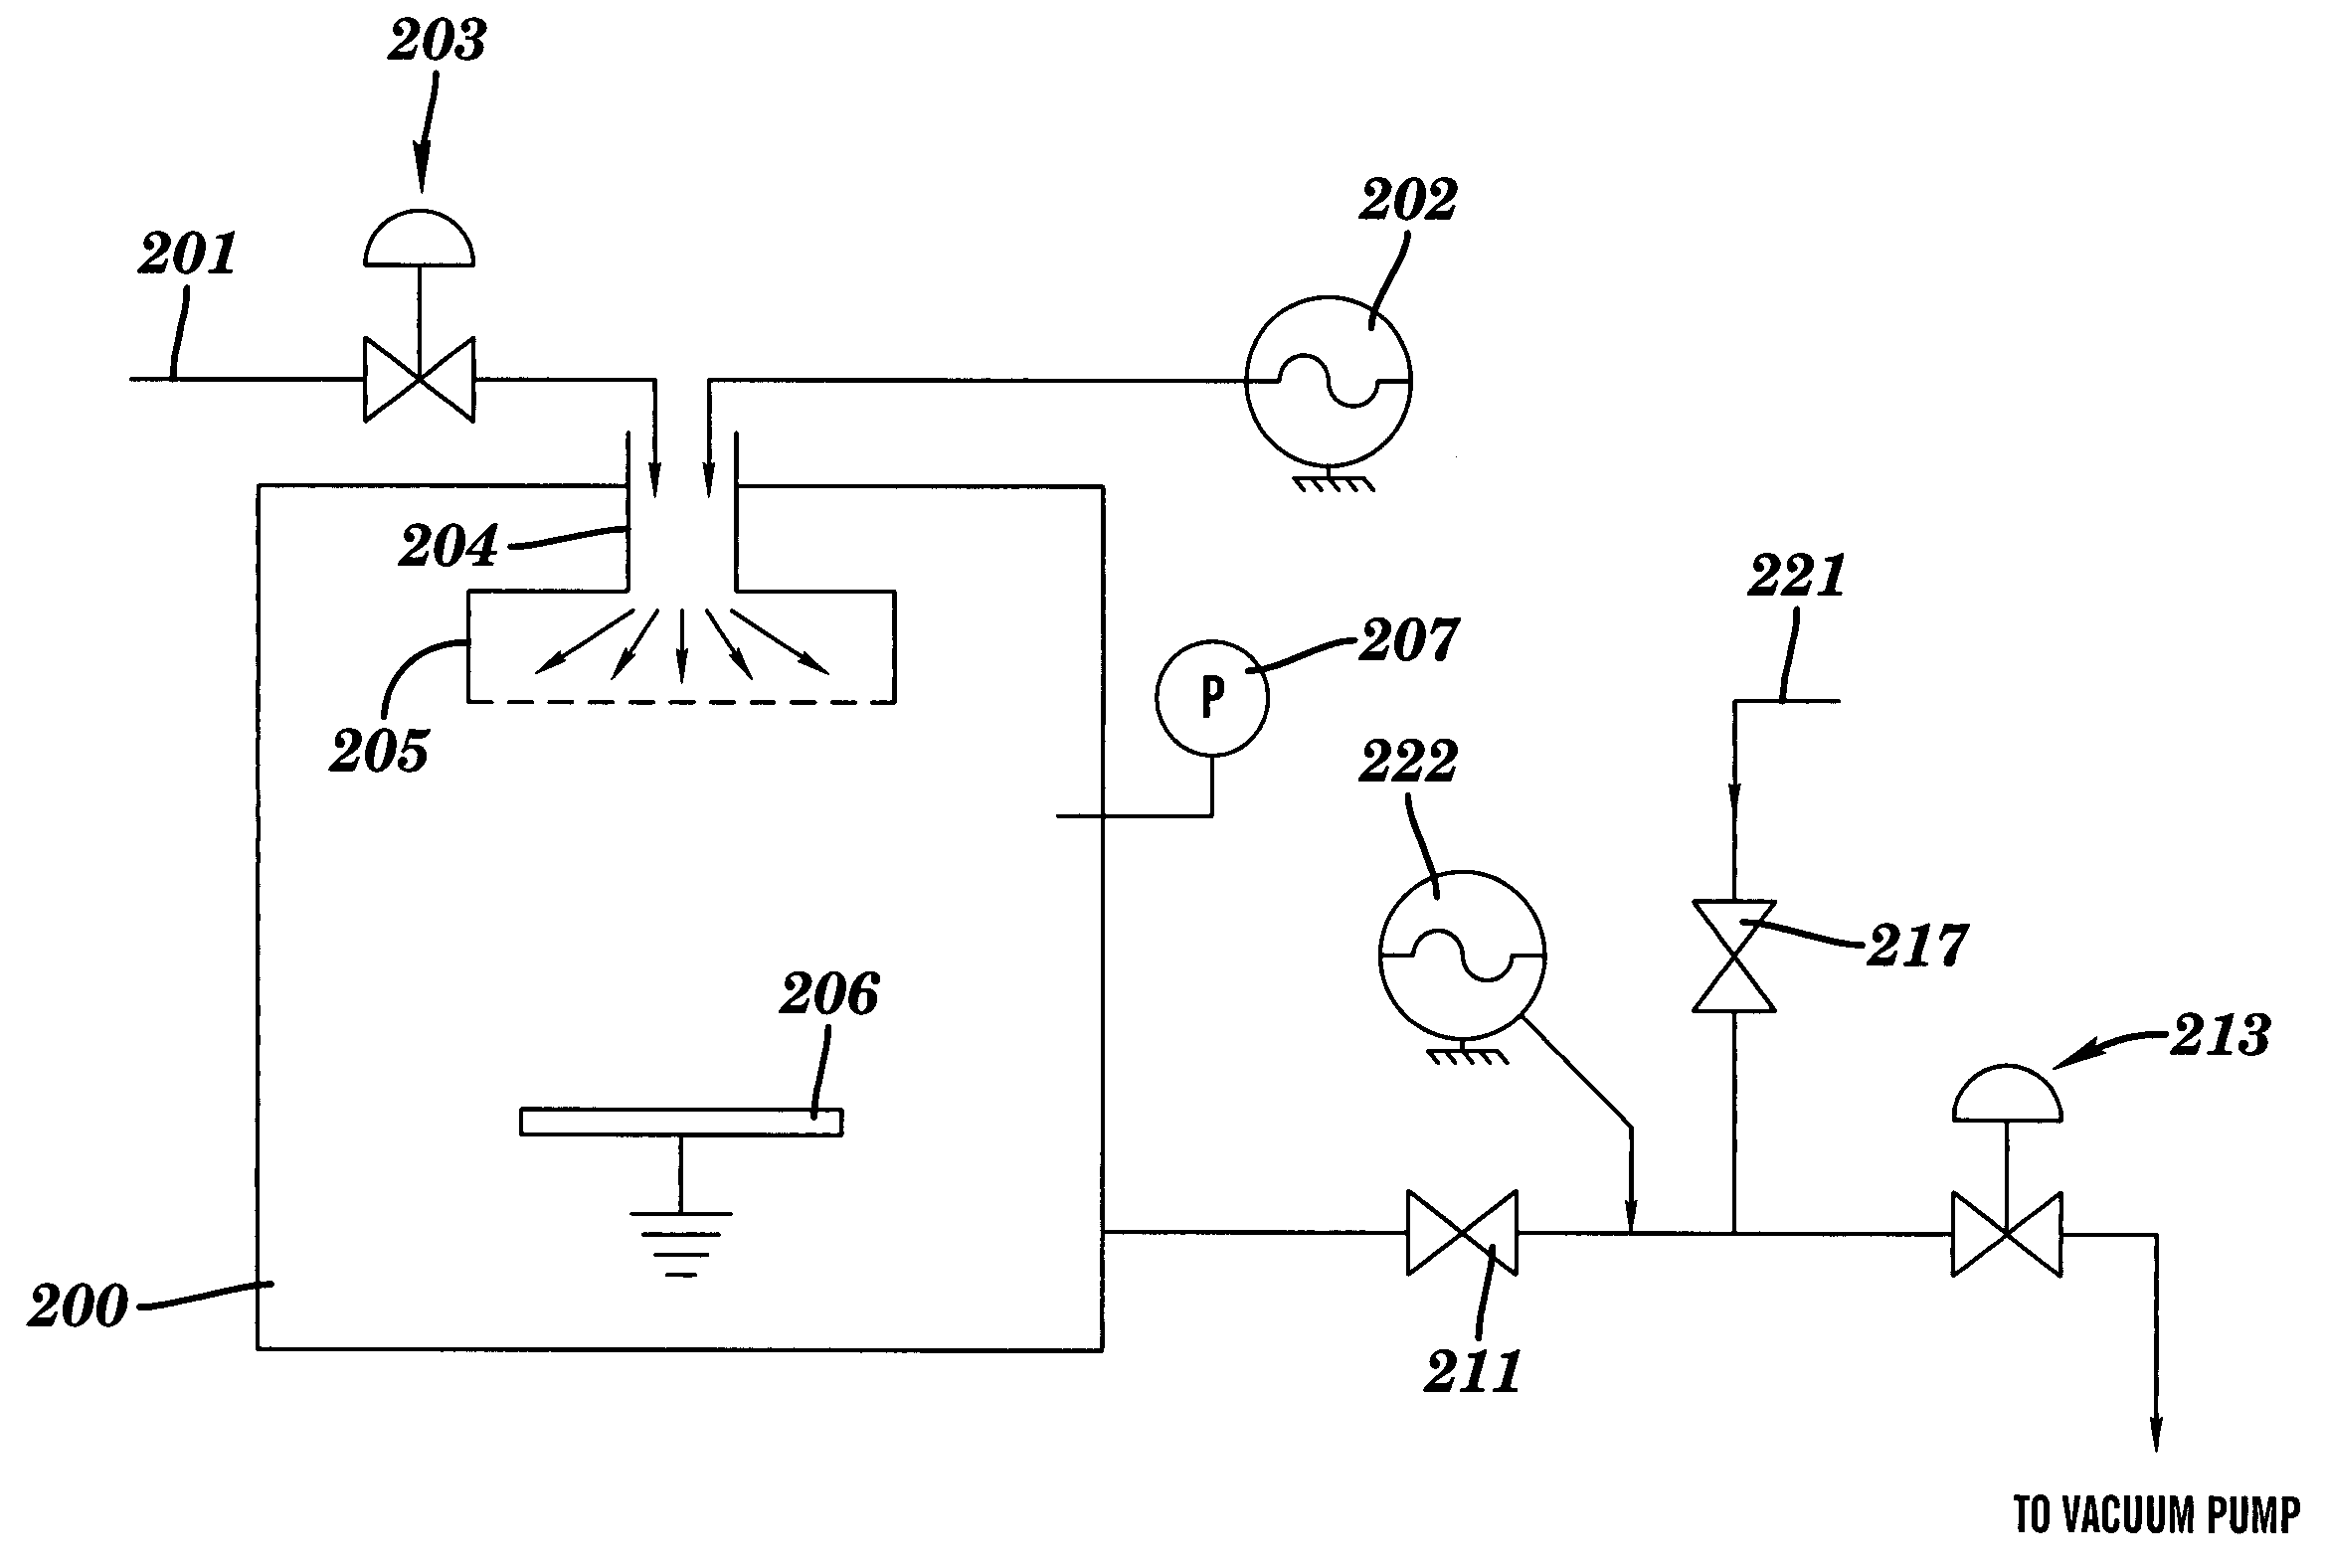 Apparatus and method for in-situ cleaning of a throttle valve in a CVD system